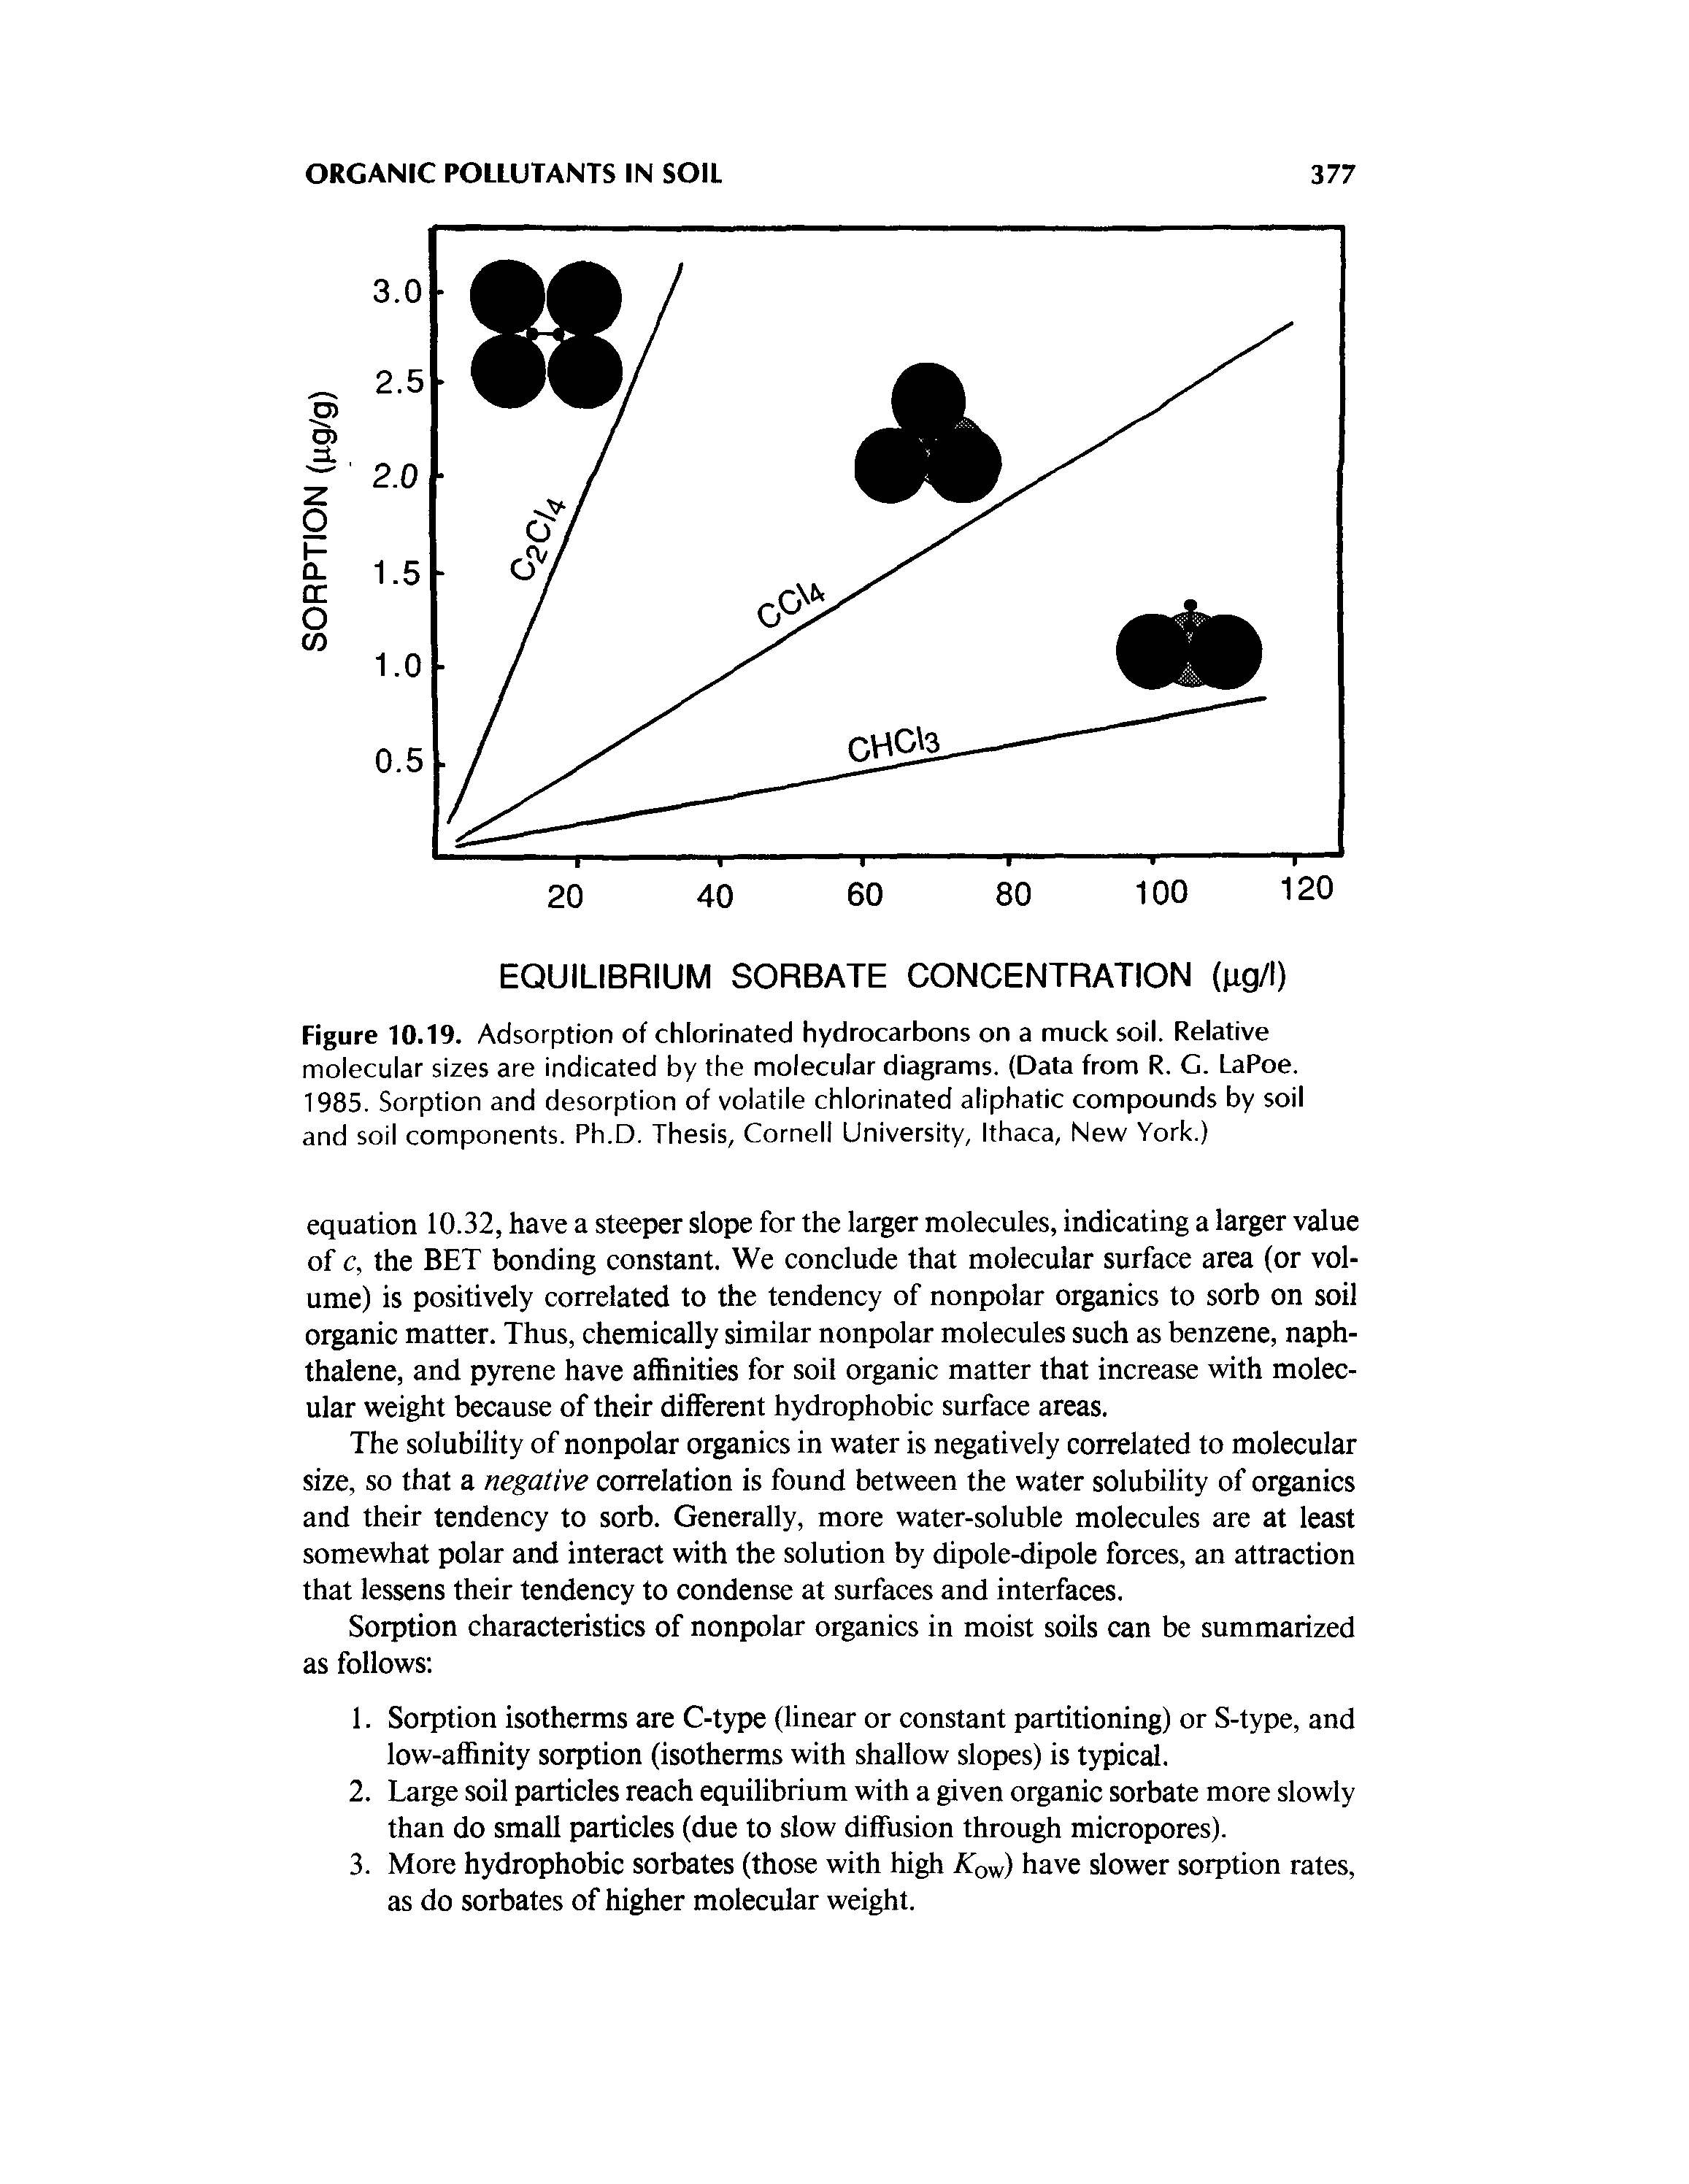 Figure 10.19. Adsorption of chlorinated hydrocarbons on a muck soil. Relative molecular sizes are indicated by the molecular diagrams. (Data from R. G. LaPoe. 1985. Sorption and desorption of volatile chlorinated aliphatic compounds by soil and soil components. Ph.D. Thesis, Cornell University, Ithaca, New York.)...